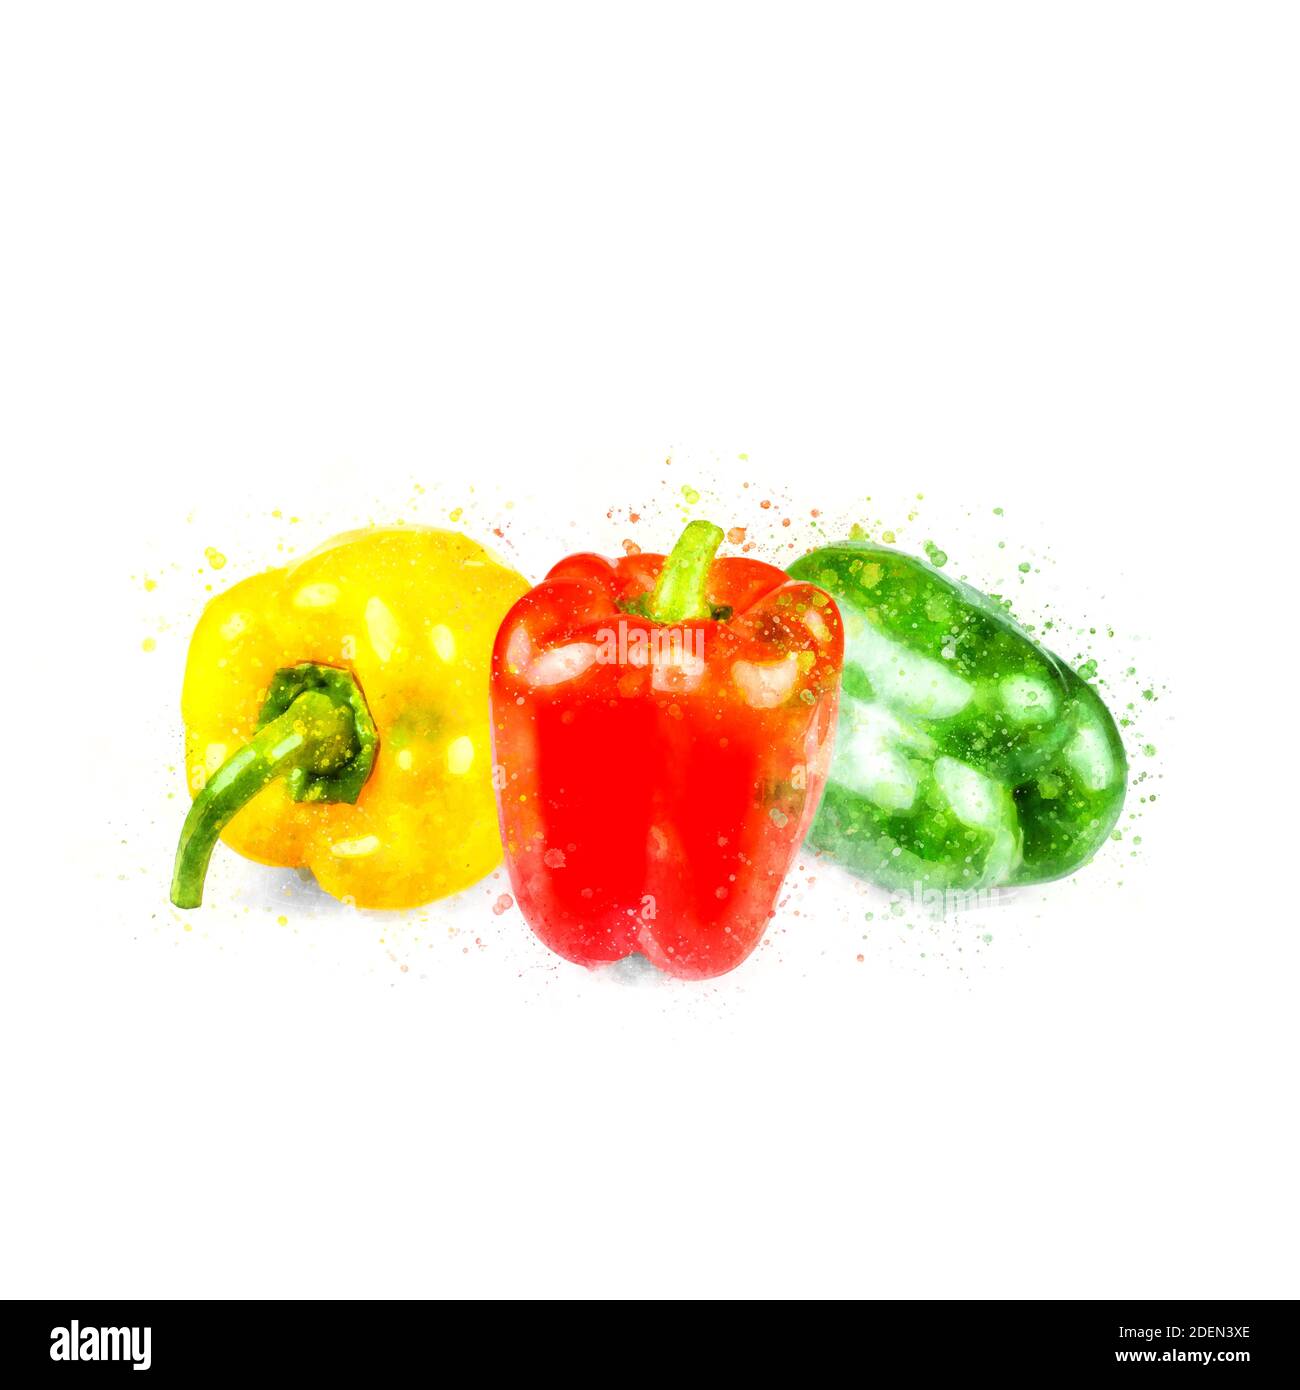 Red, green and yellow peppers as an illustration watercolor Stock Photo